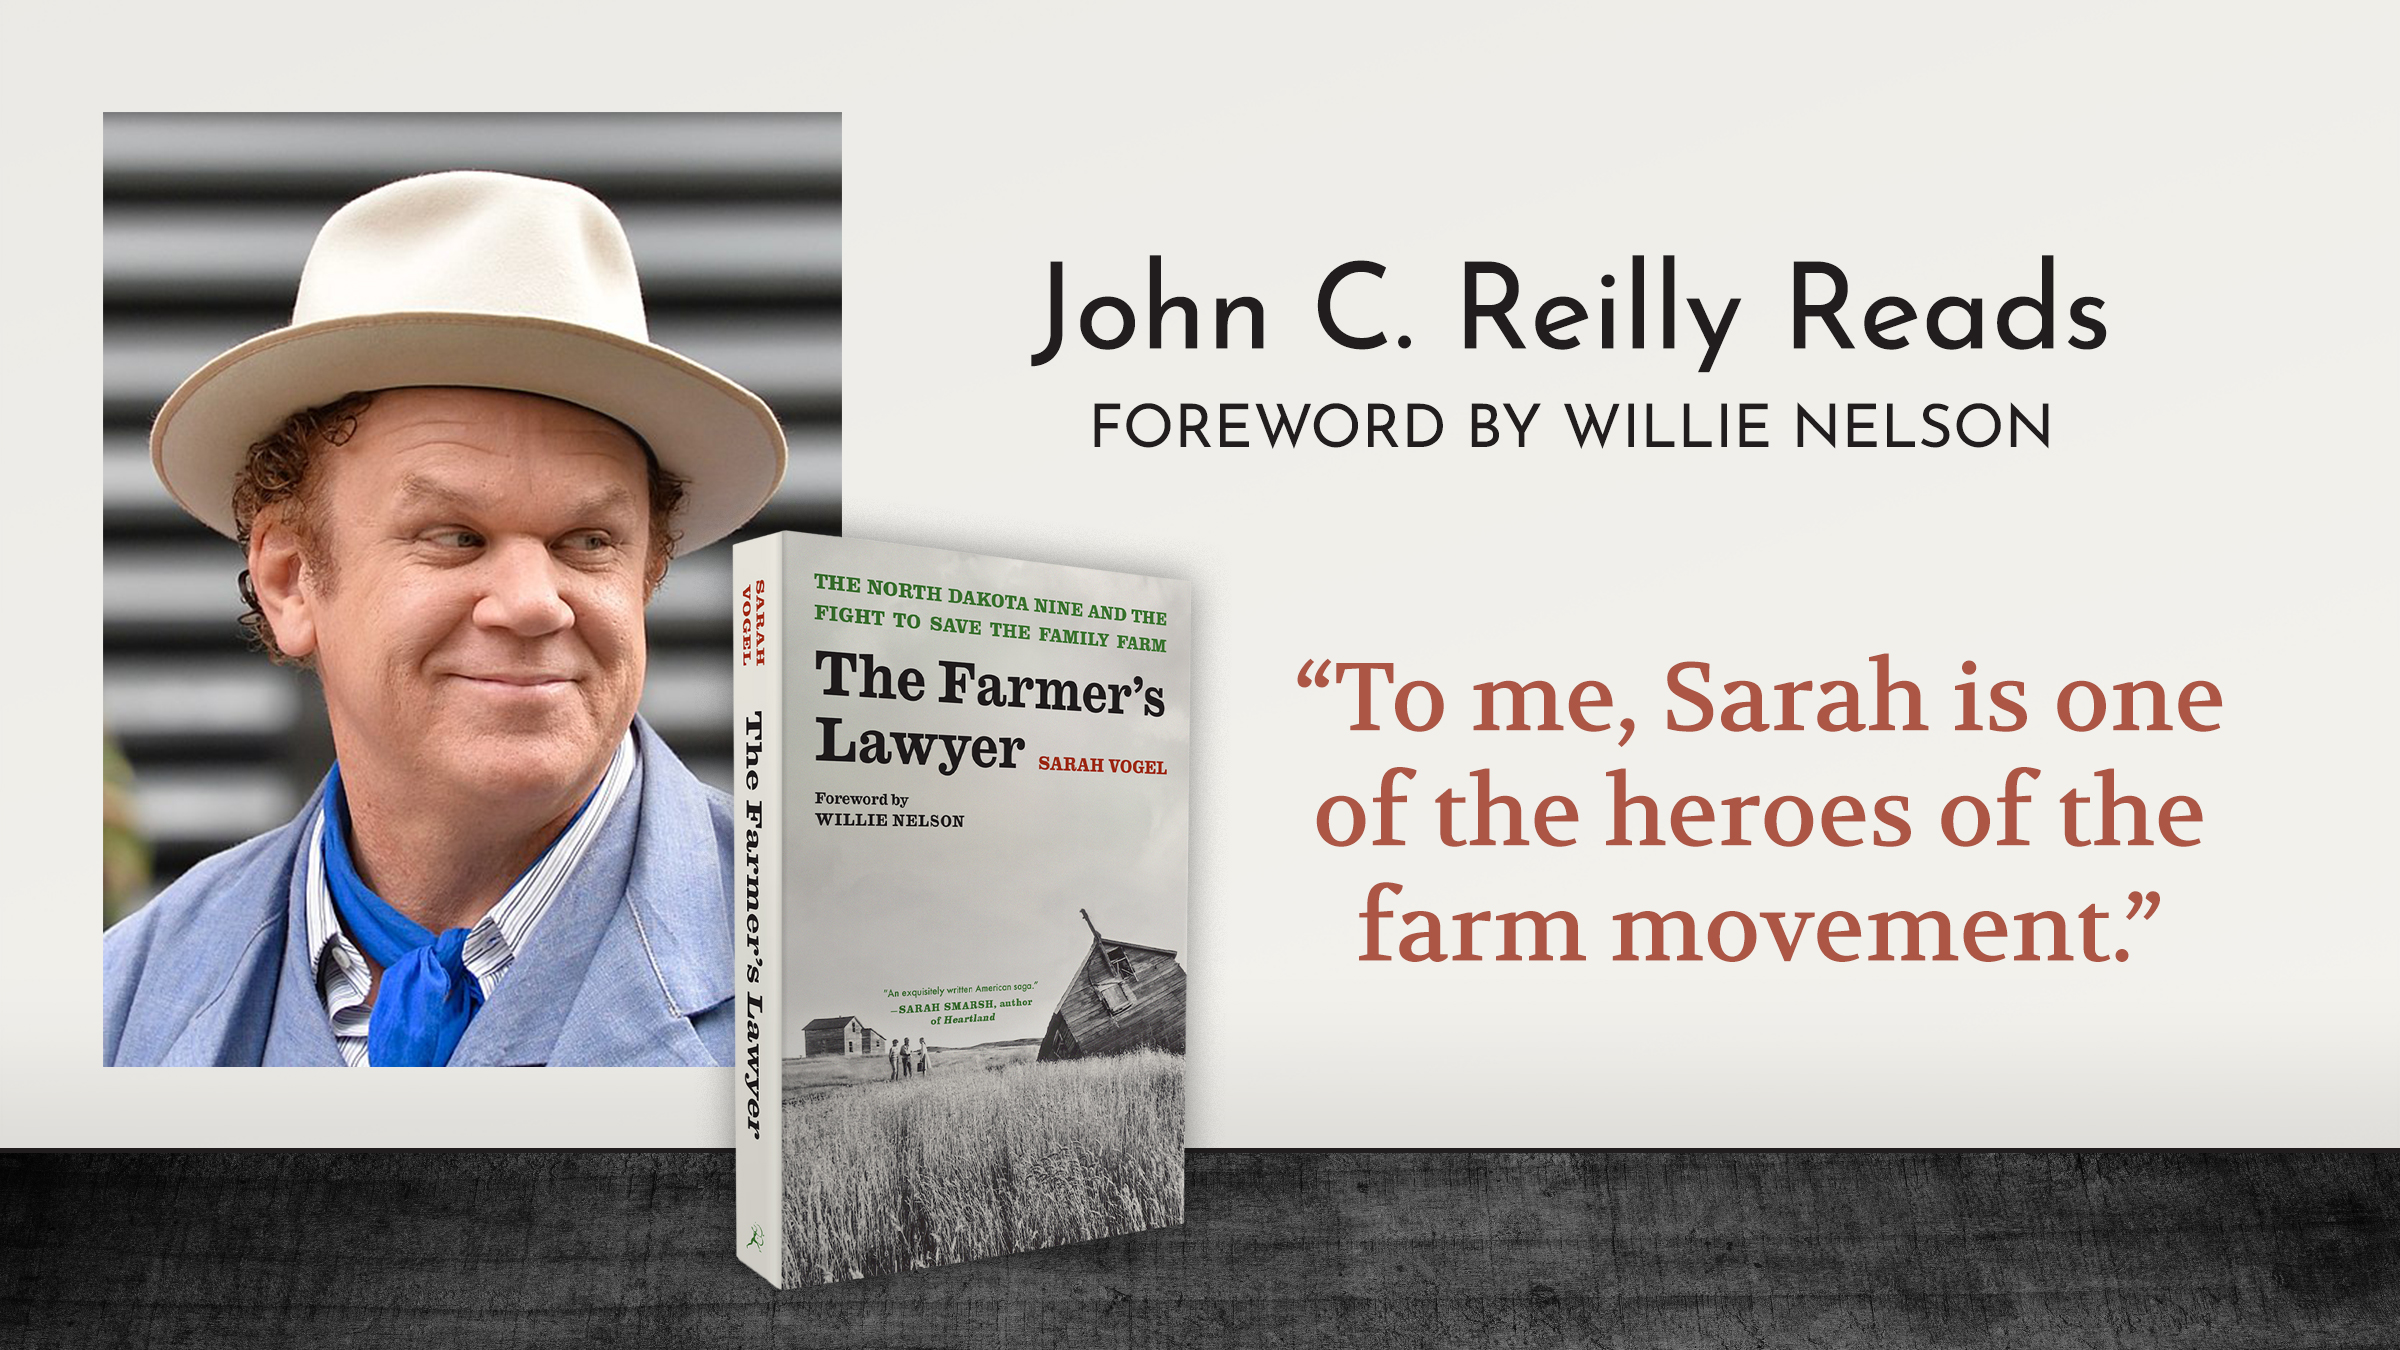 Listen to John C. Reilly read Willie Nelson's foreword to The Farmer's Lawyer paperback